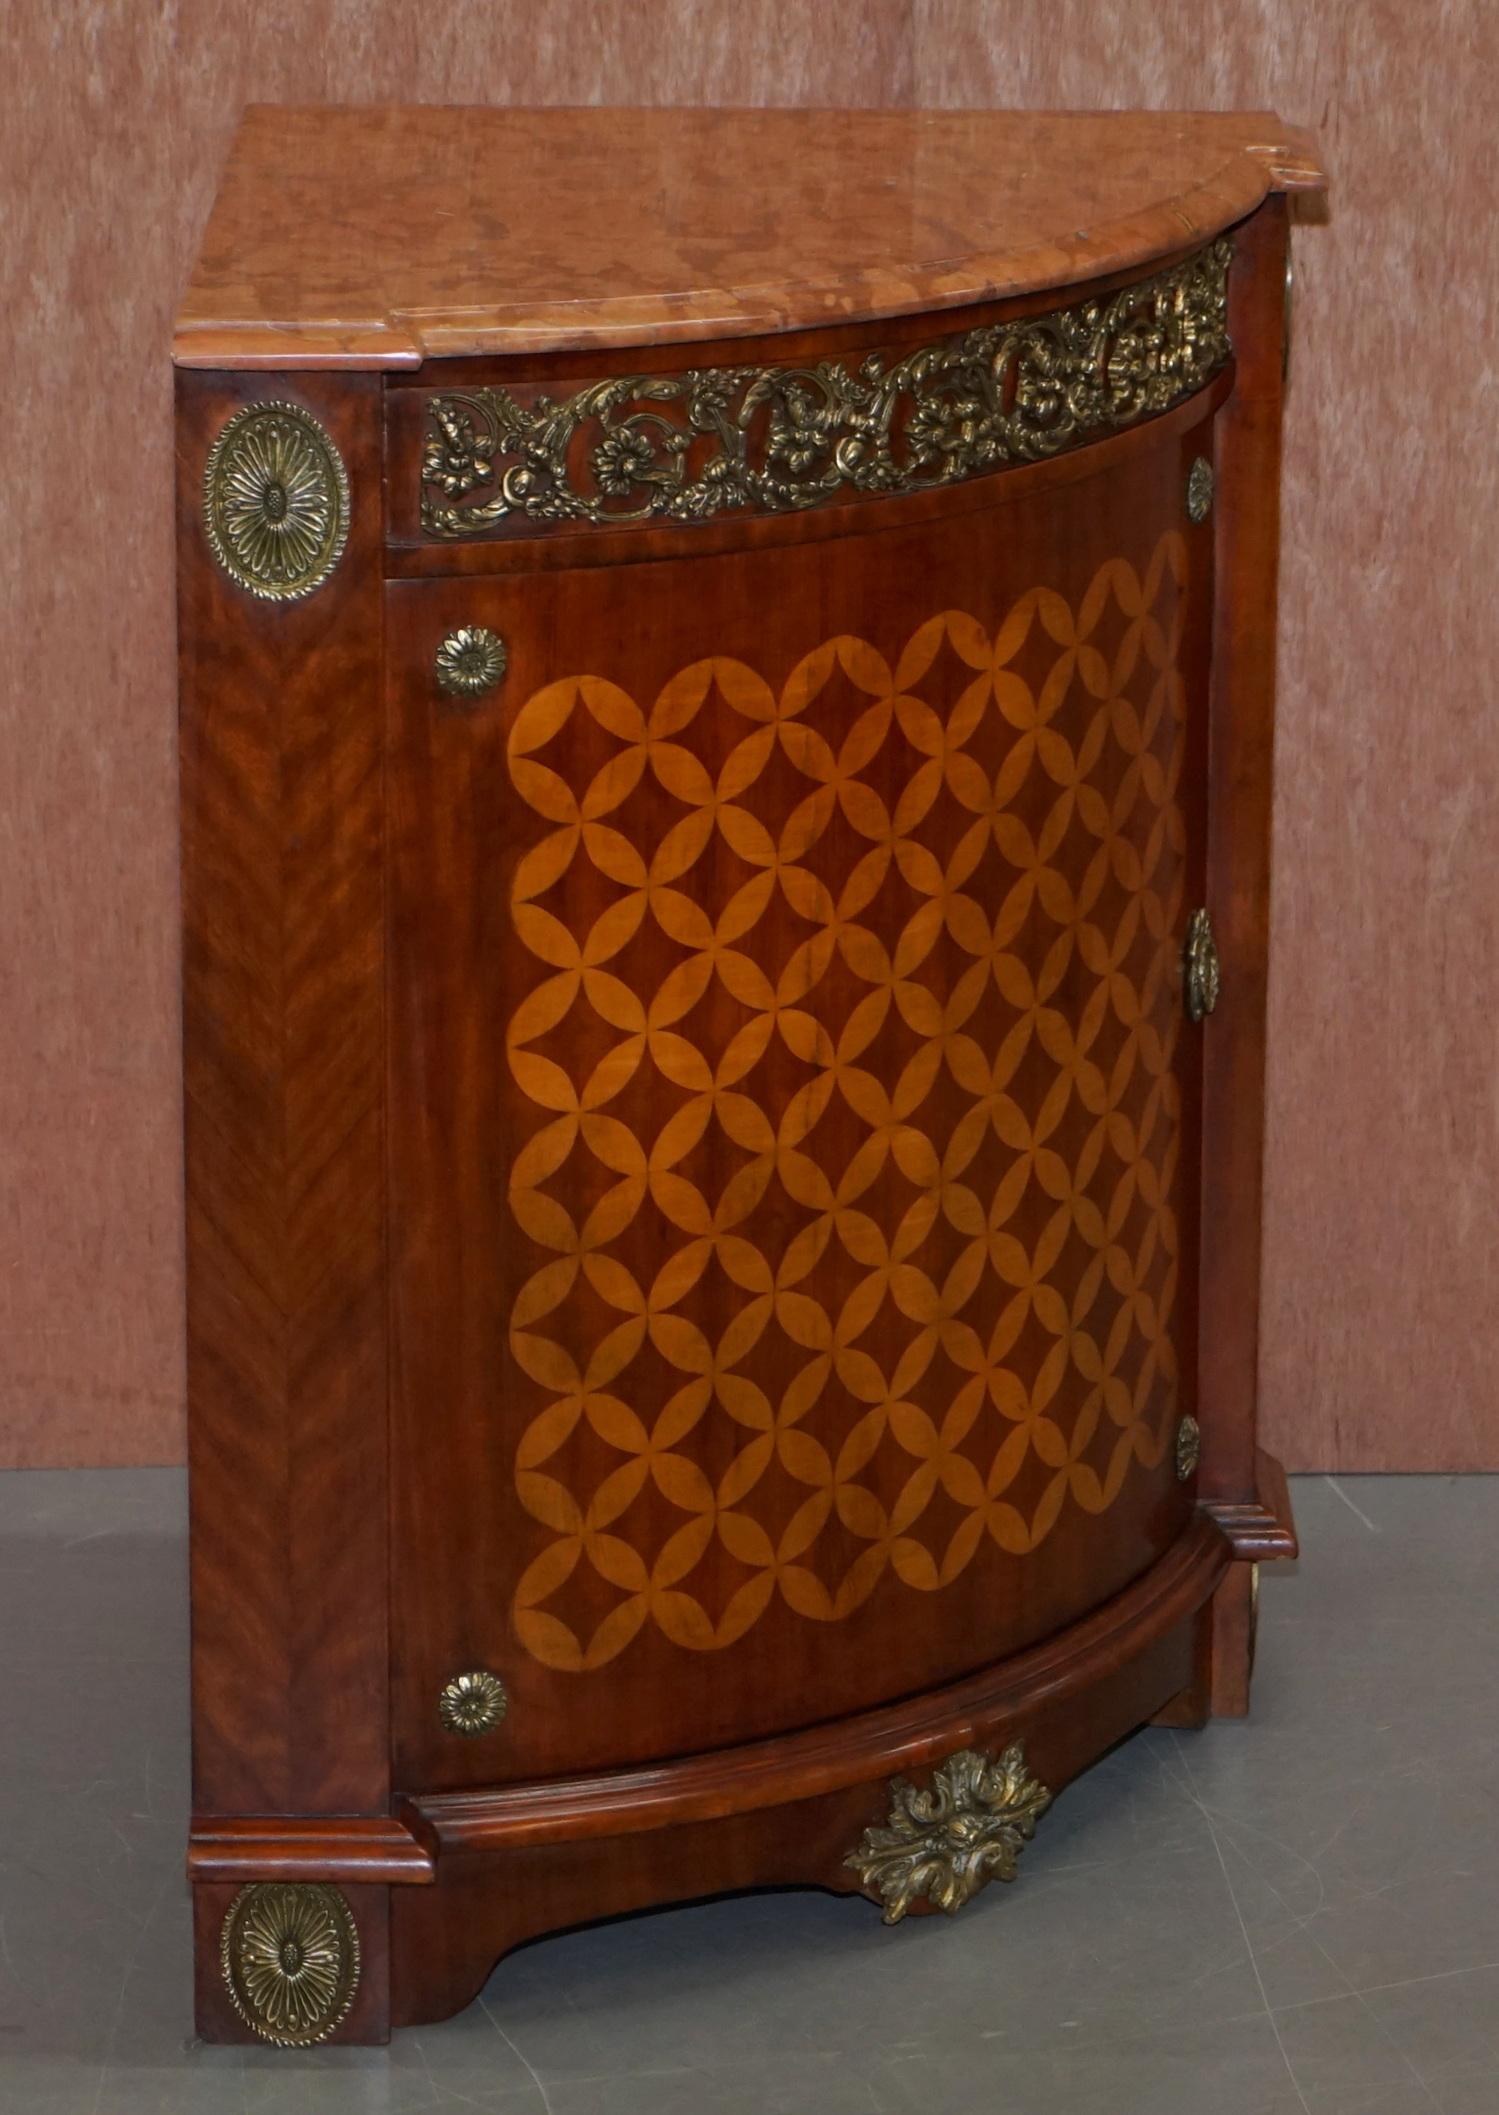 We are delighted to offer for sale this lovely pair of Louis XVI style mahogany and walnut marquetry inlaid corner cabinets with gilt metal fittings and solid marble top

A very good looking, decorative and well made pair, they are circa 1900 but